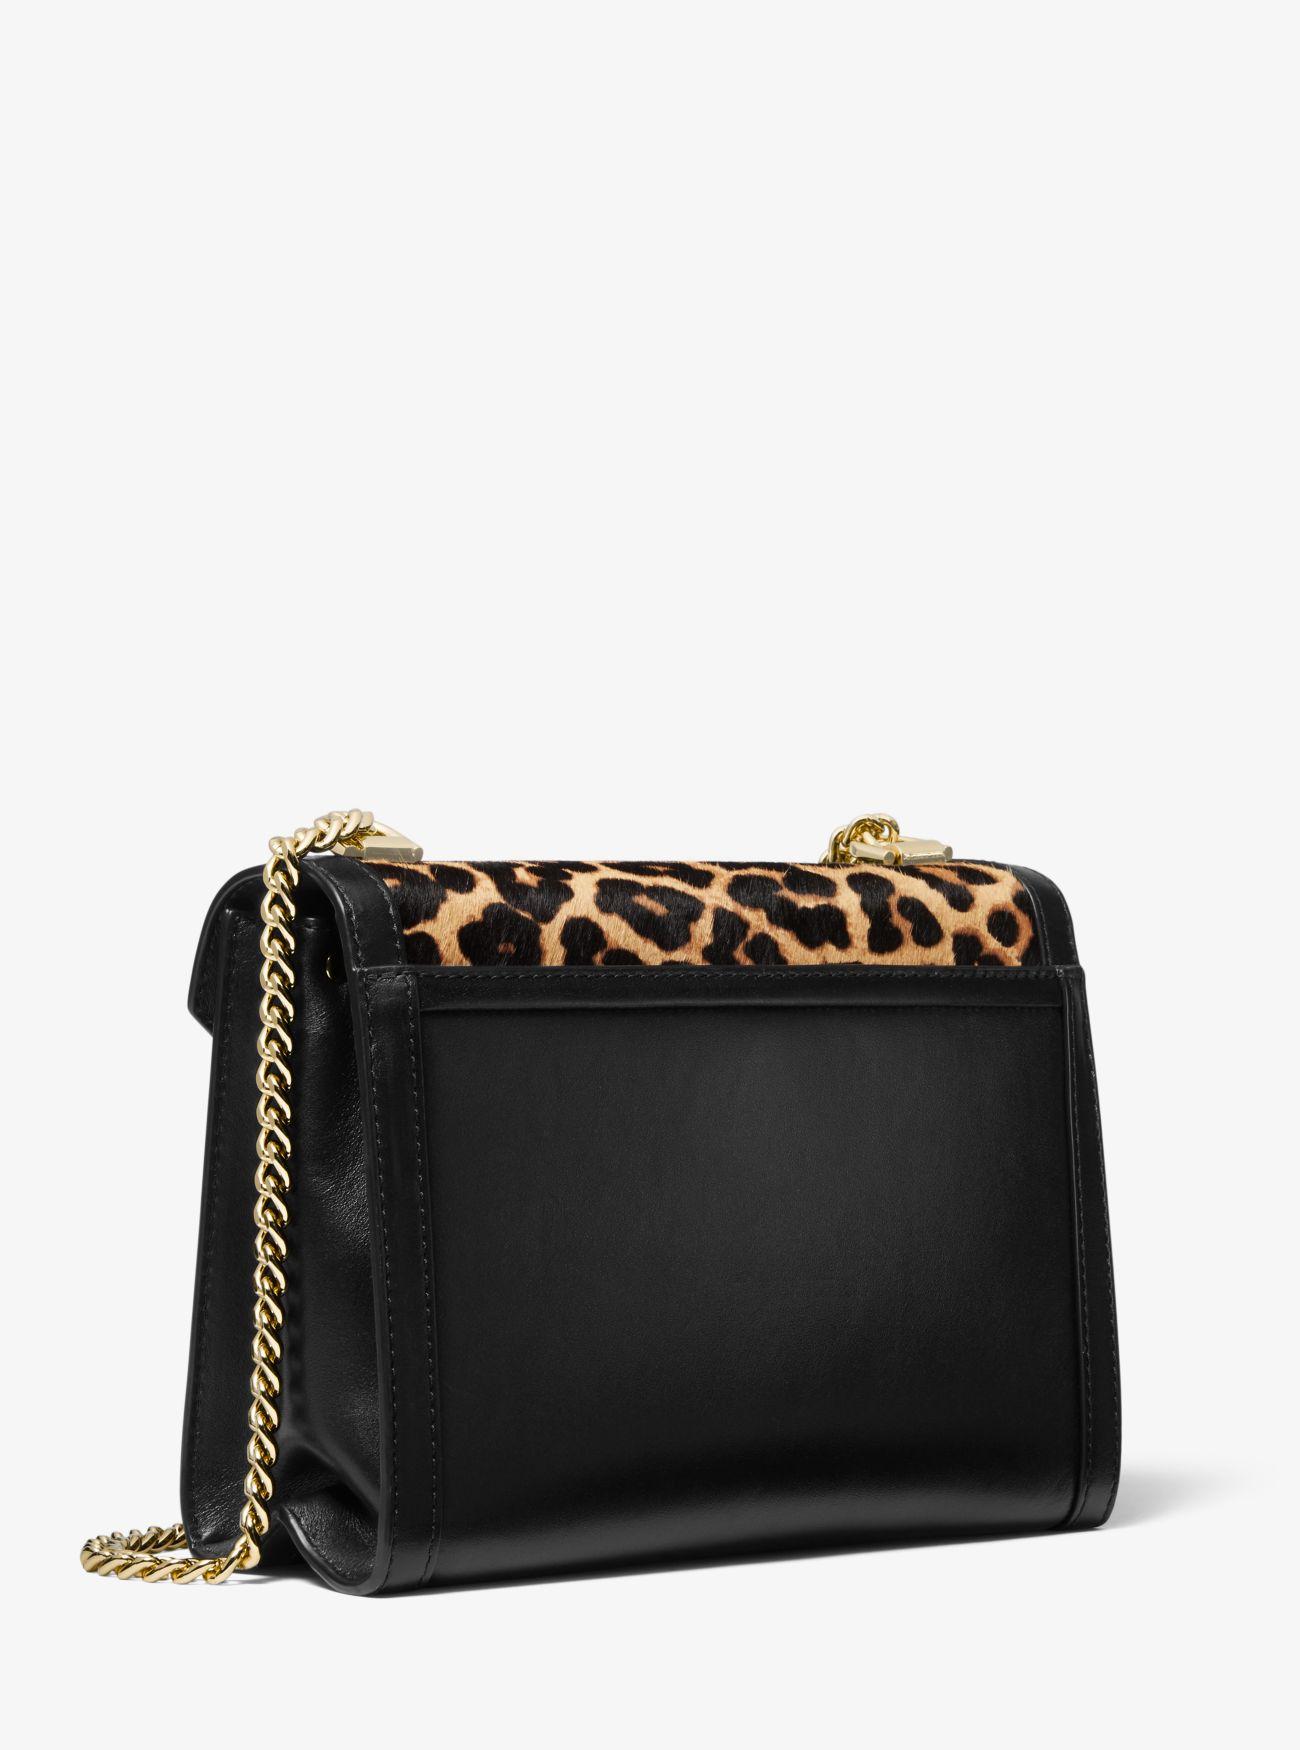 Michael Kors Leather Whitney Large Leopard Calf Hair Convertible ...